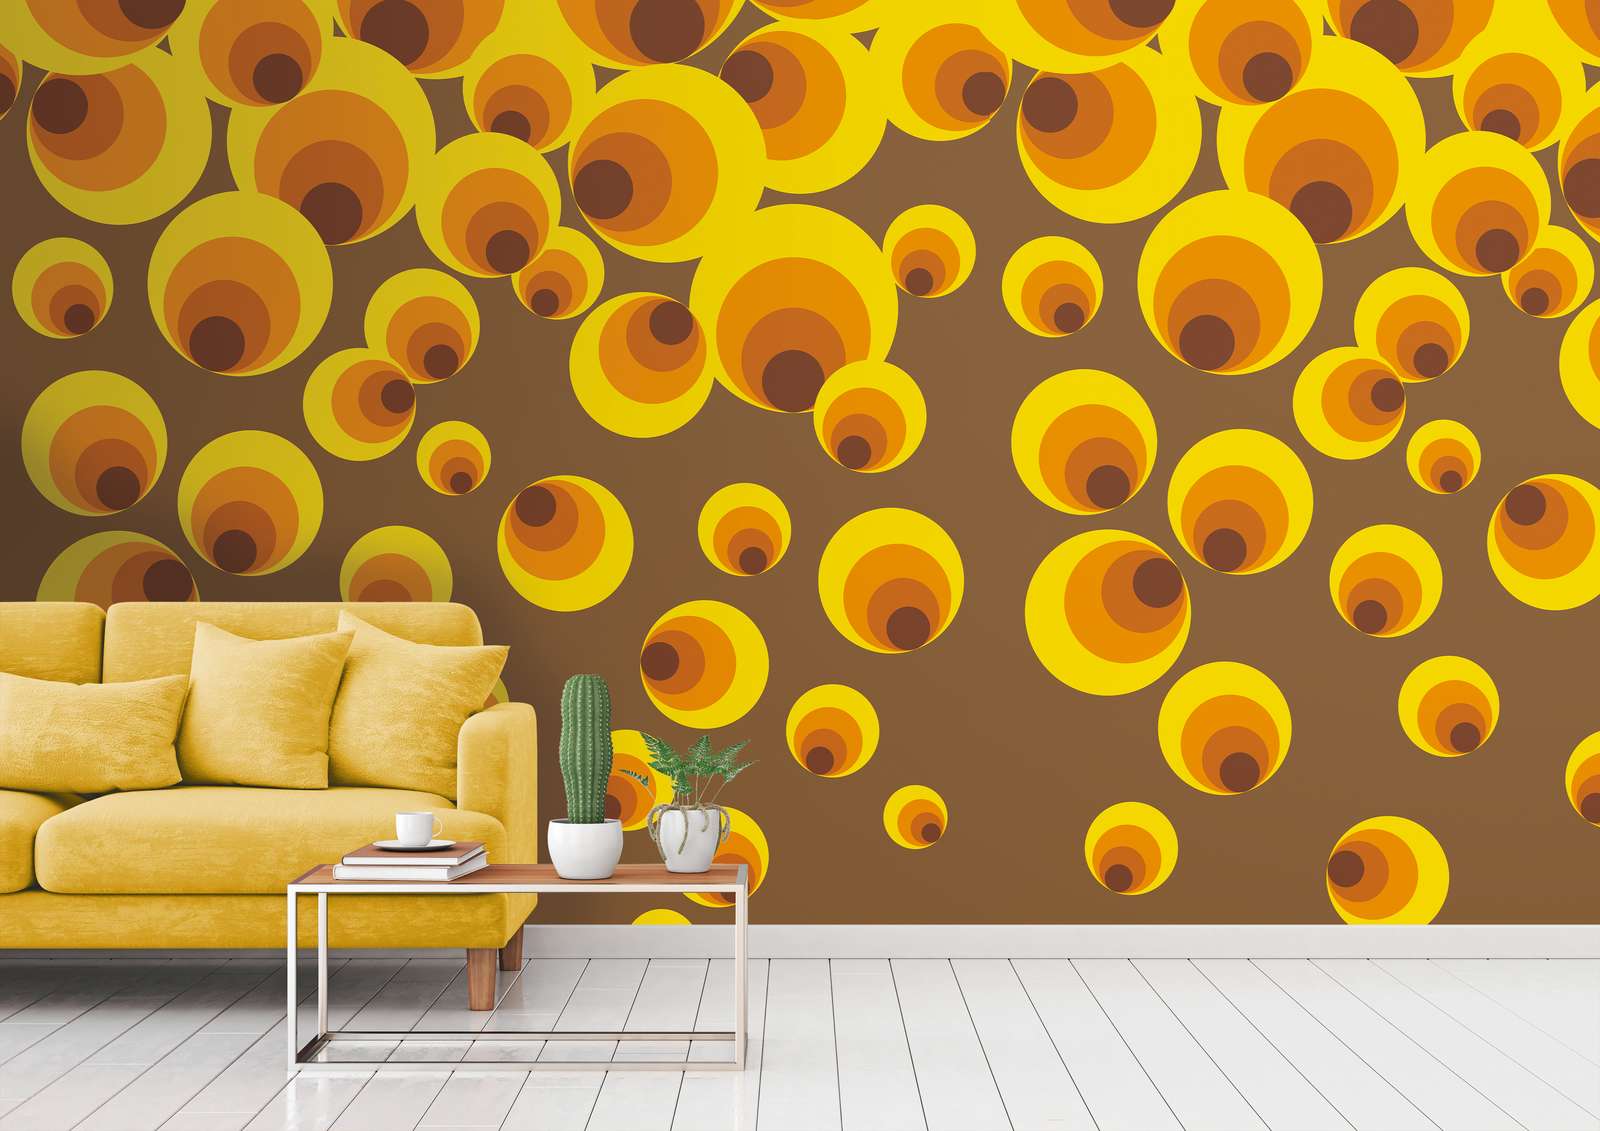             Non-woven wallpaper with large dotted pattern in retro style - yellow, orange, brown
        